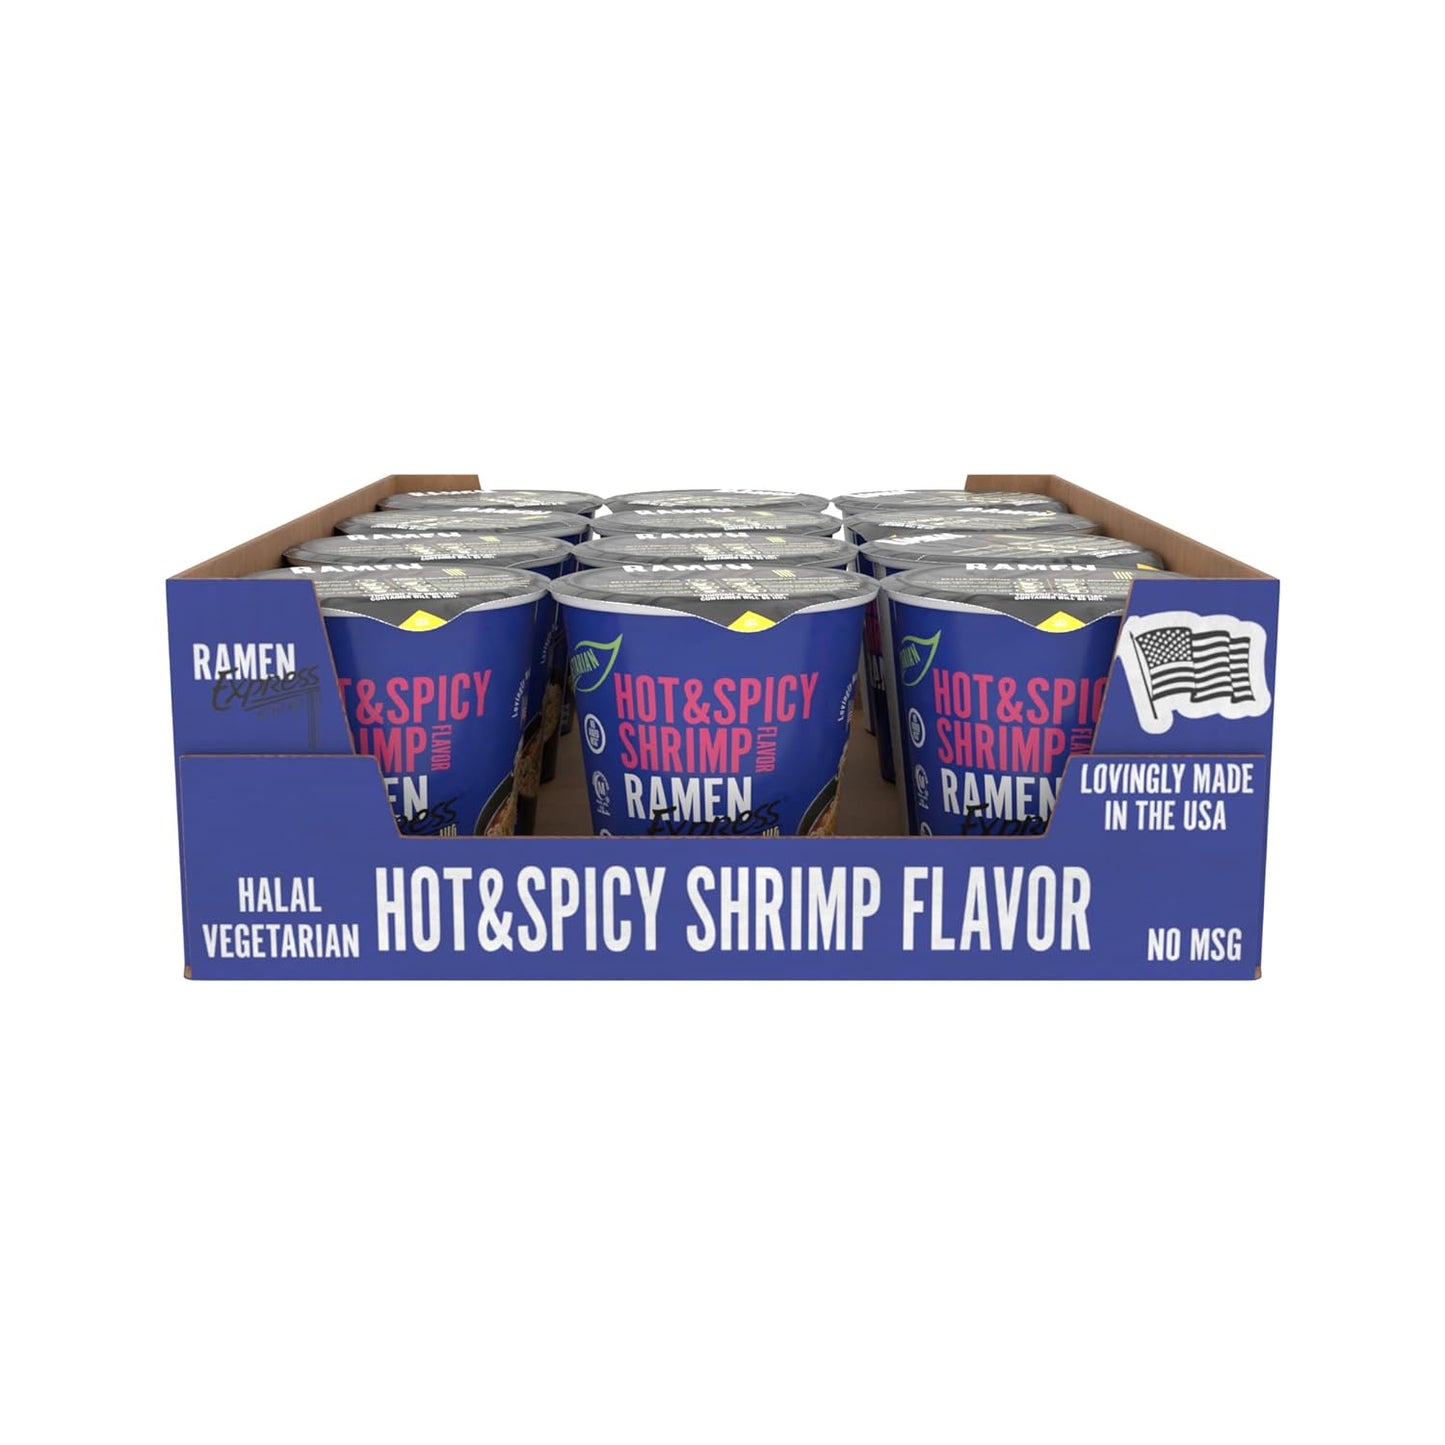 "Chef Woo's Spicy Shrimp Ramen Cup: 12-Pack, Vegetarian, No MSG, Halal, Egg-Free, Dairy-Free"